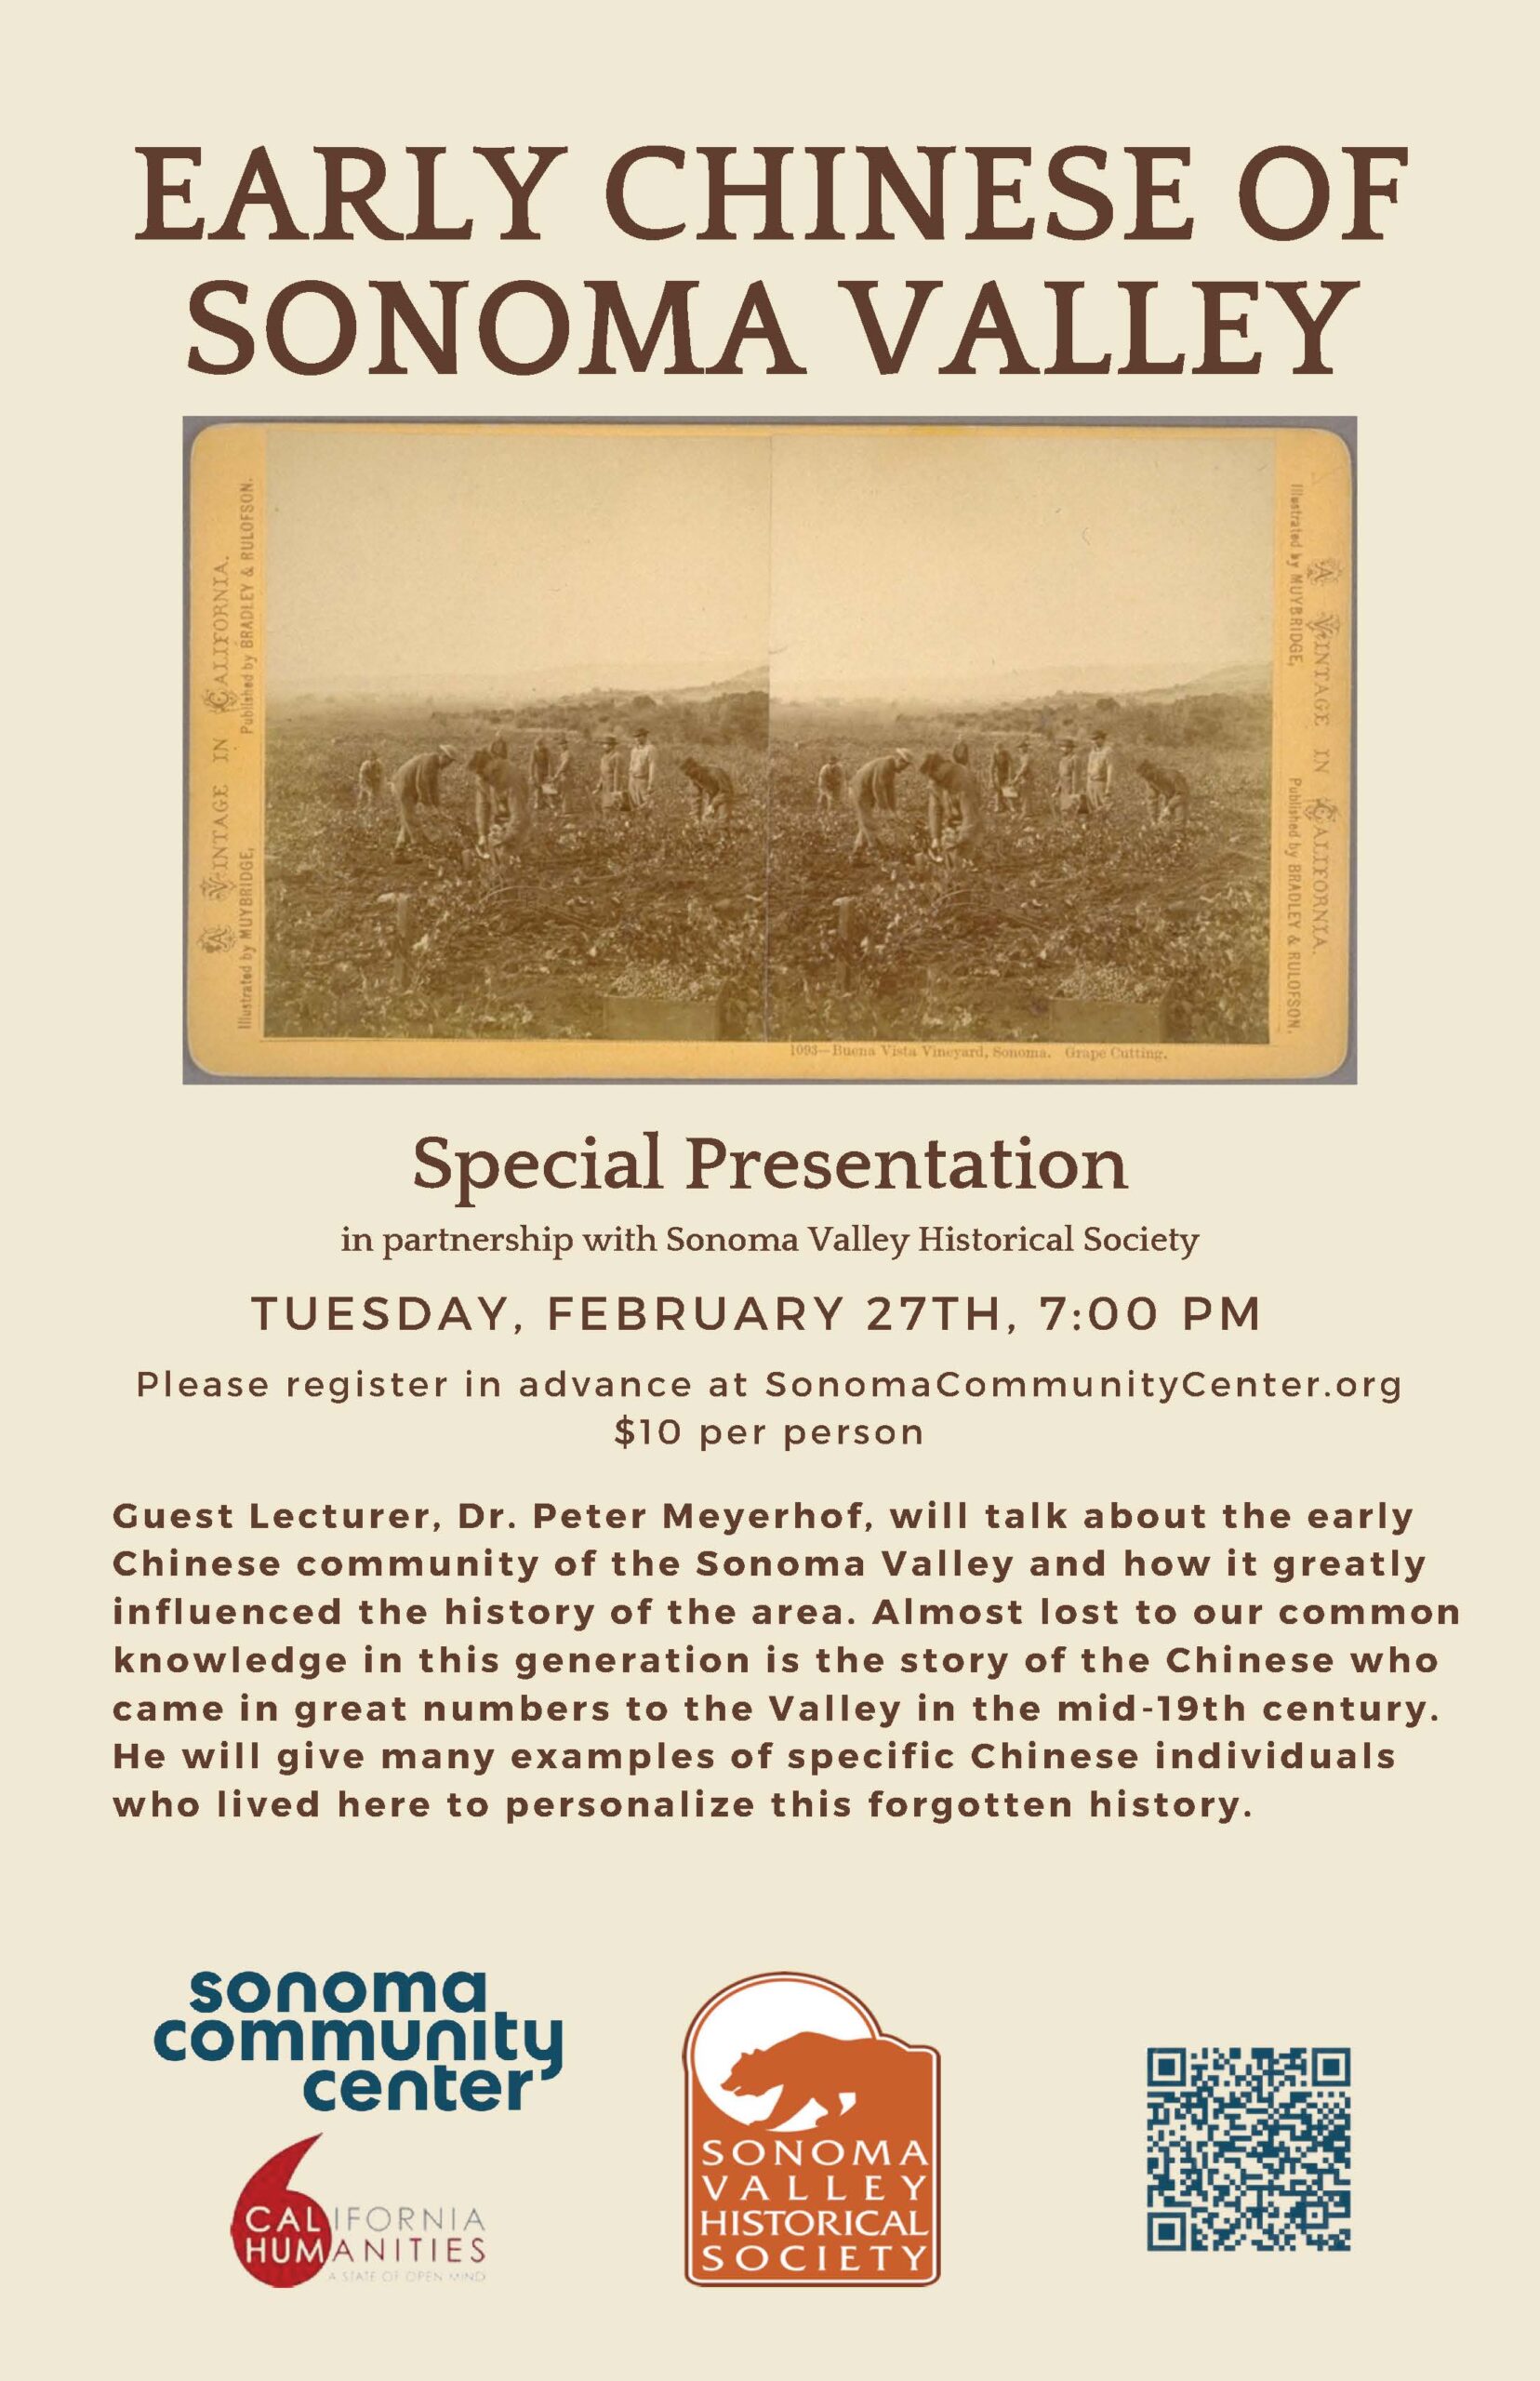 Early Chinese of Sonoma Valley, program flyer with daguerreotype of person working in a field.